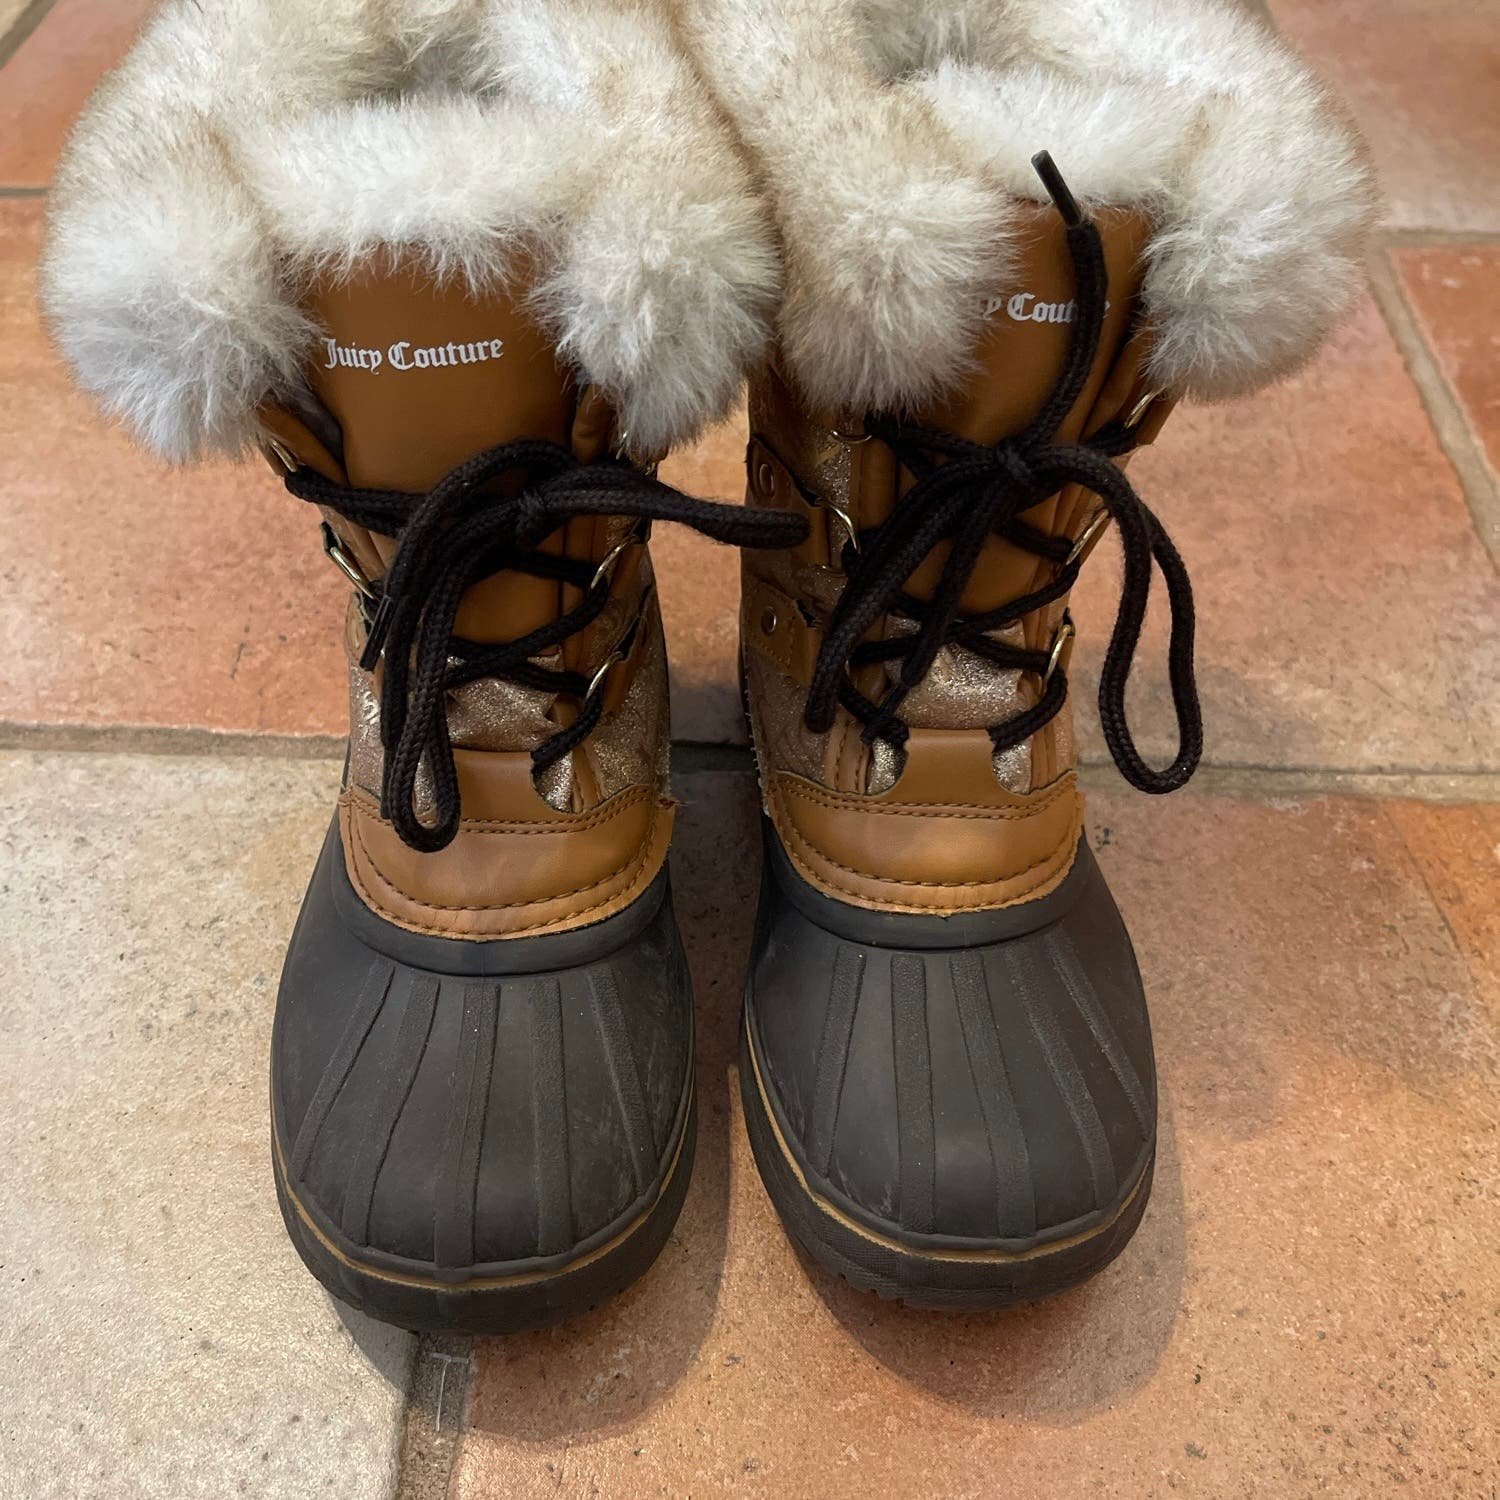 Juicy Couture faux fur lined Duck boots size 2 mNGBPVD5w